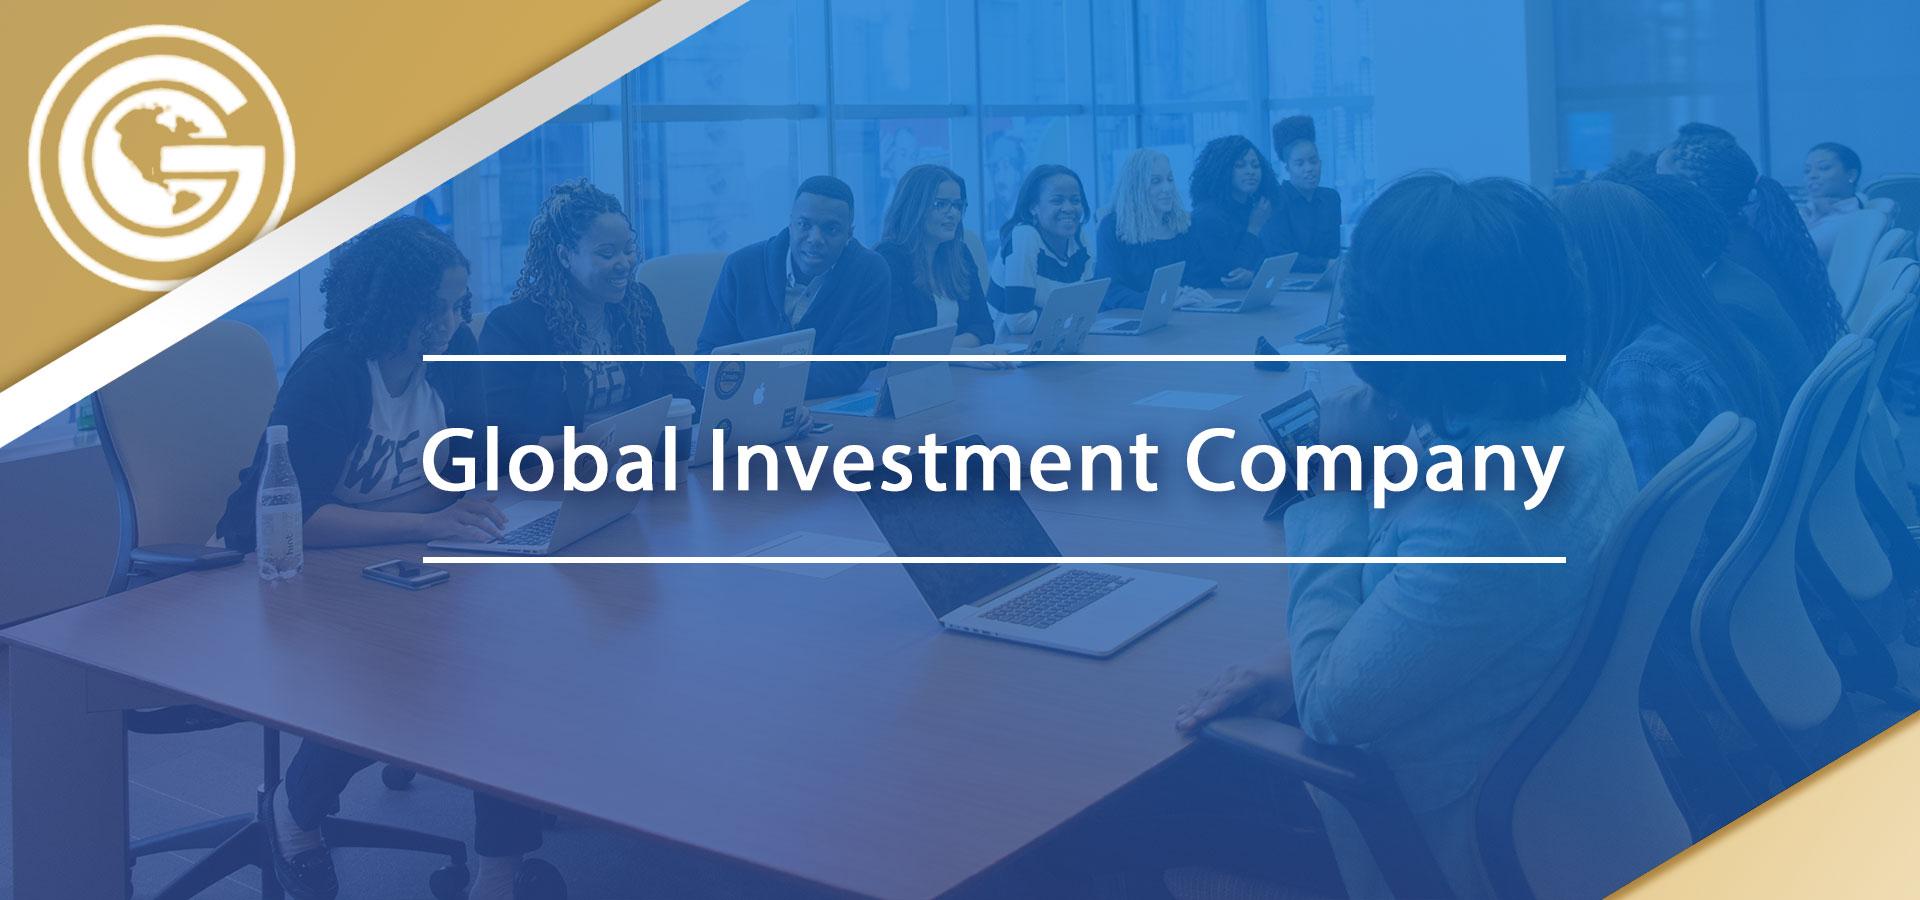 About Global Investment Company